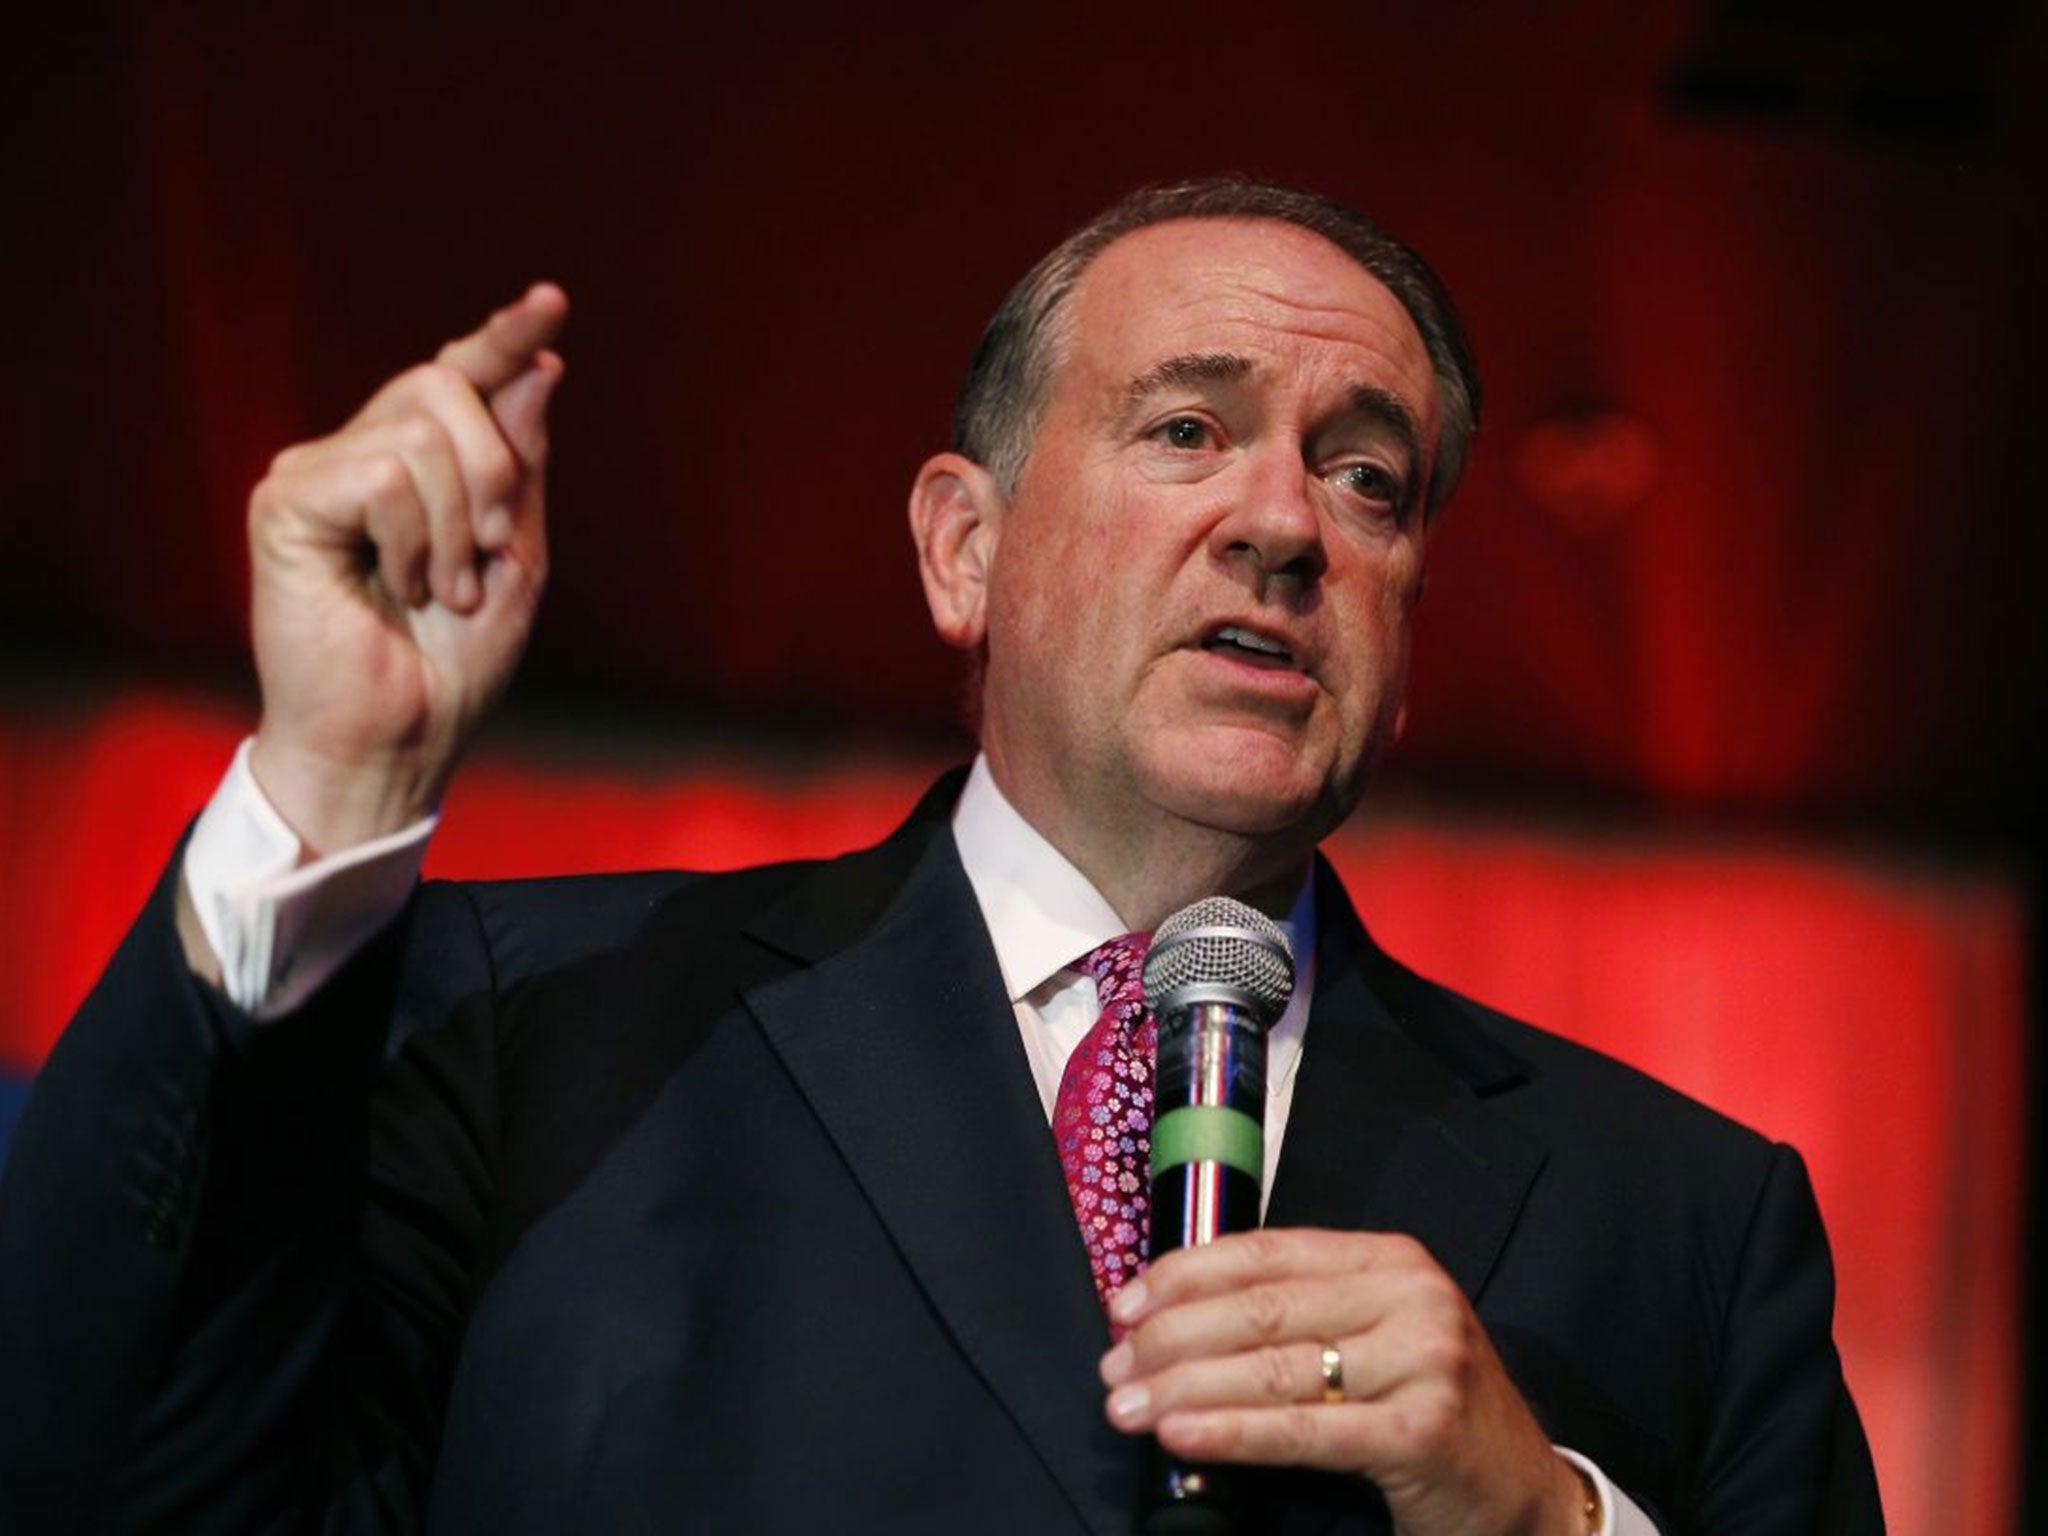 Mike Huckabee is sticking with his criticism of the Iran nuclear deal, after first making the comment when denouncing President Barack Obama for his role in the agreement reached by the United States and other world powers.